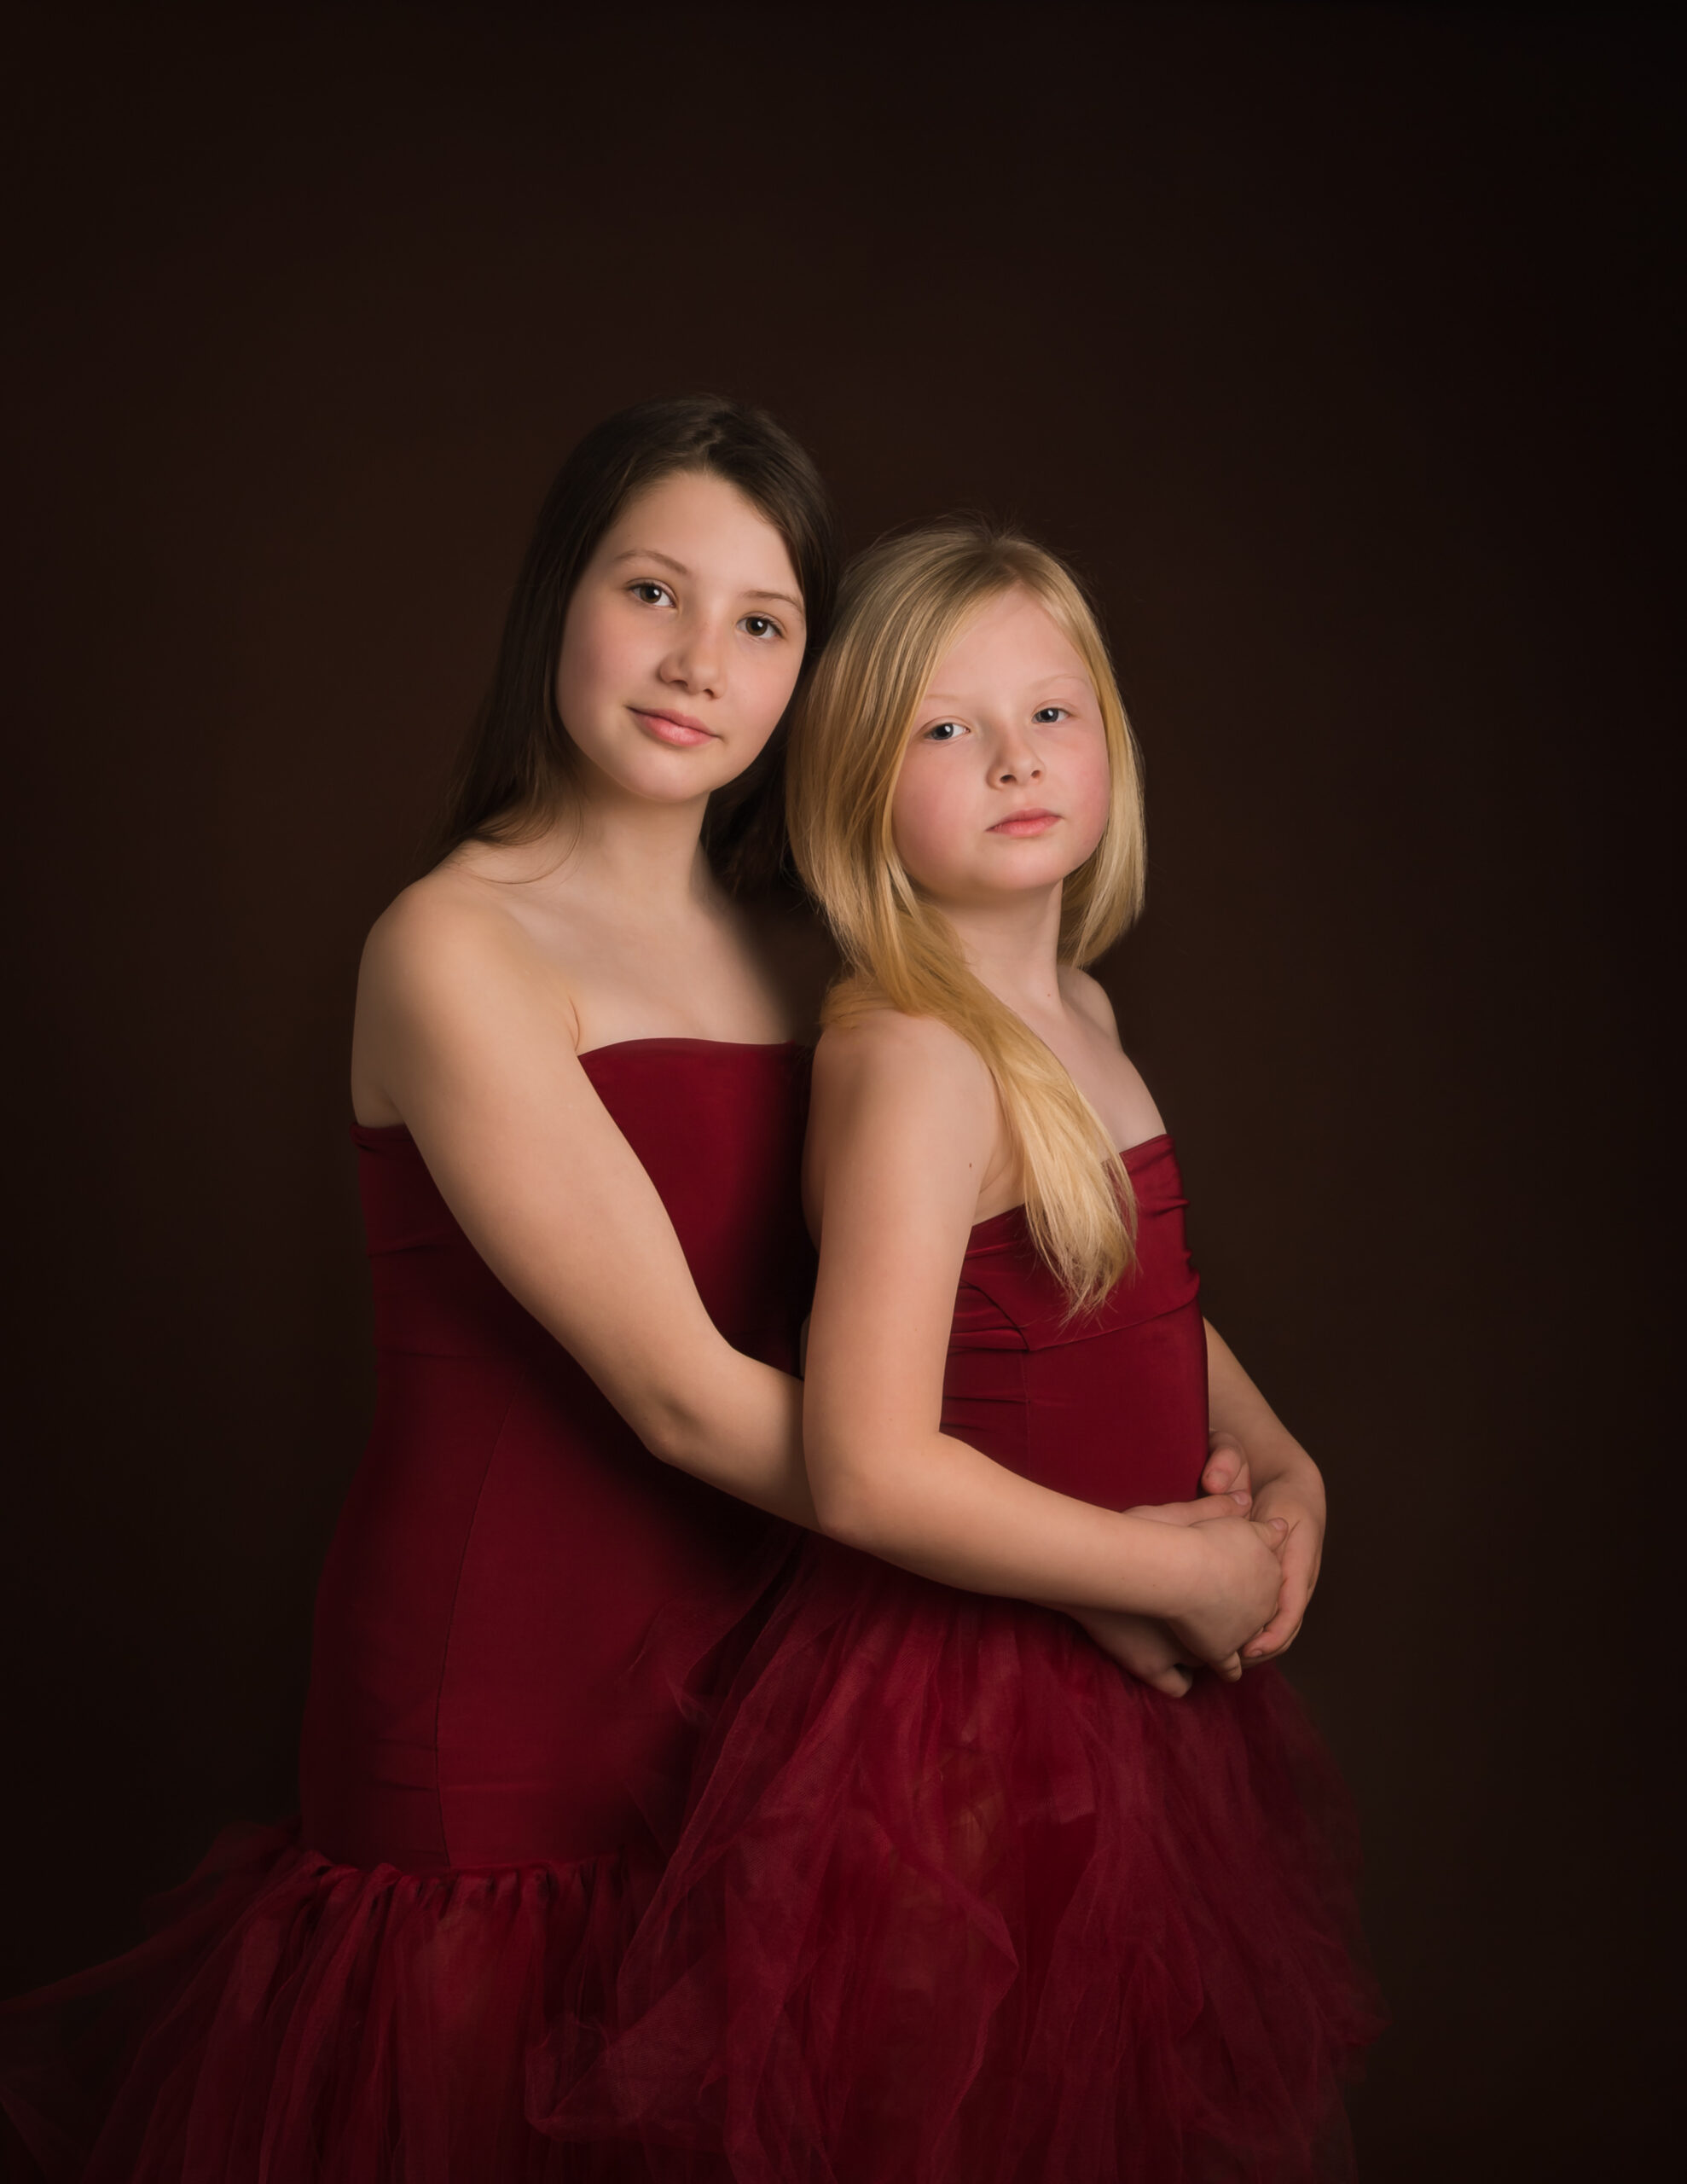 two girls dressed in red by family photographer in basingstoke hampshireWhitchurch Hampshire